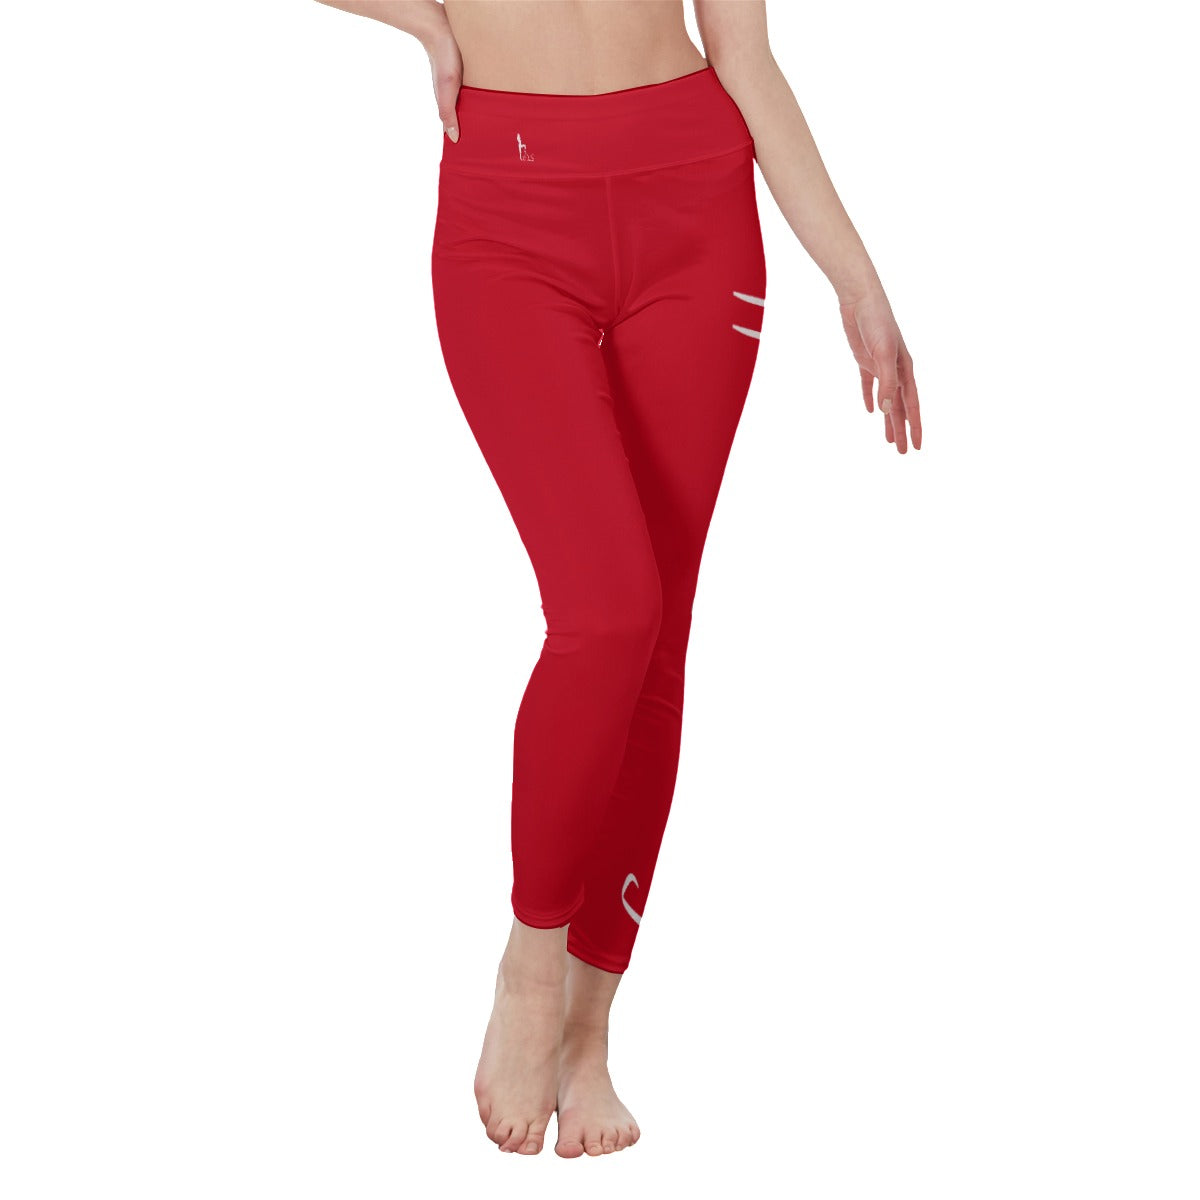 👖 Officially Sexy Colors Collection Venetian Red With White Logo Women's High Waist Leggings Color #D0021B 👖